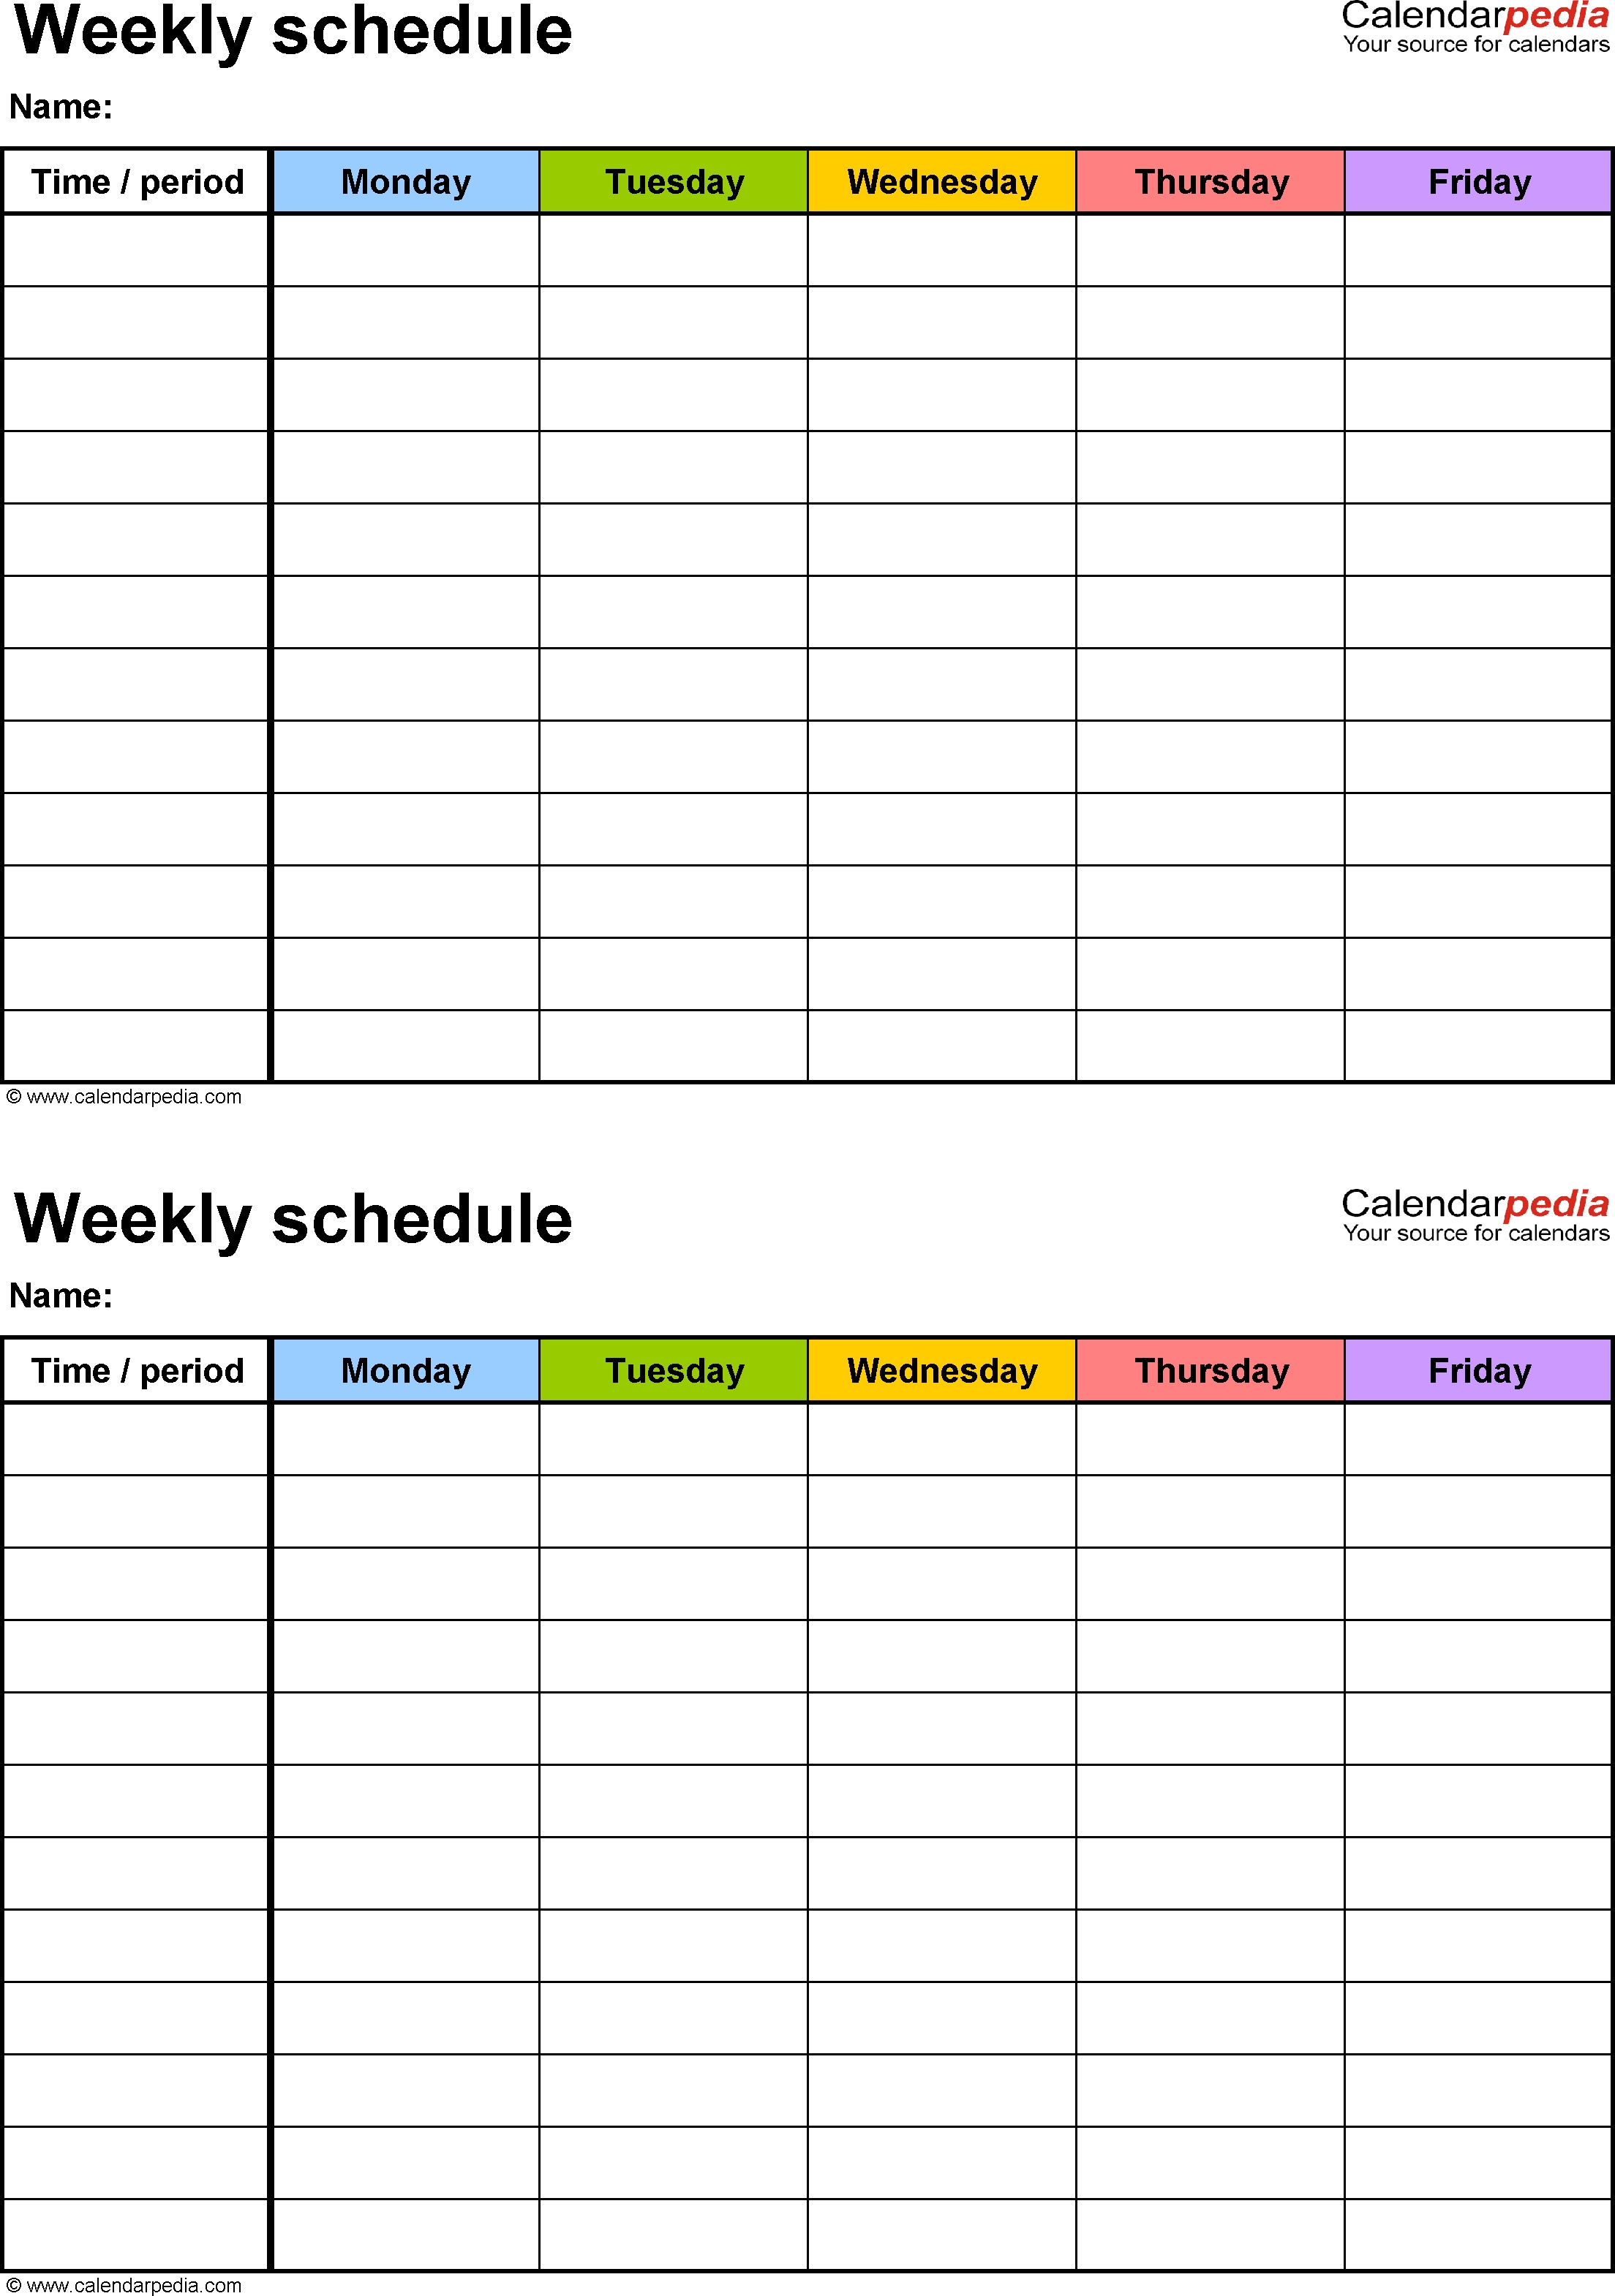 Free Weekly Schedule Templates For Word - 18 Templates-Blank Monday Through Friday Schedule